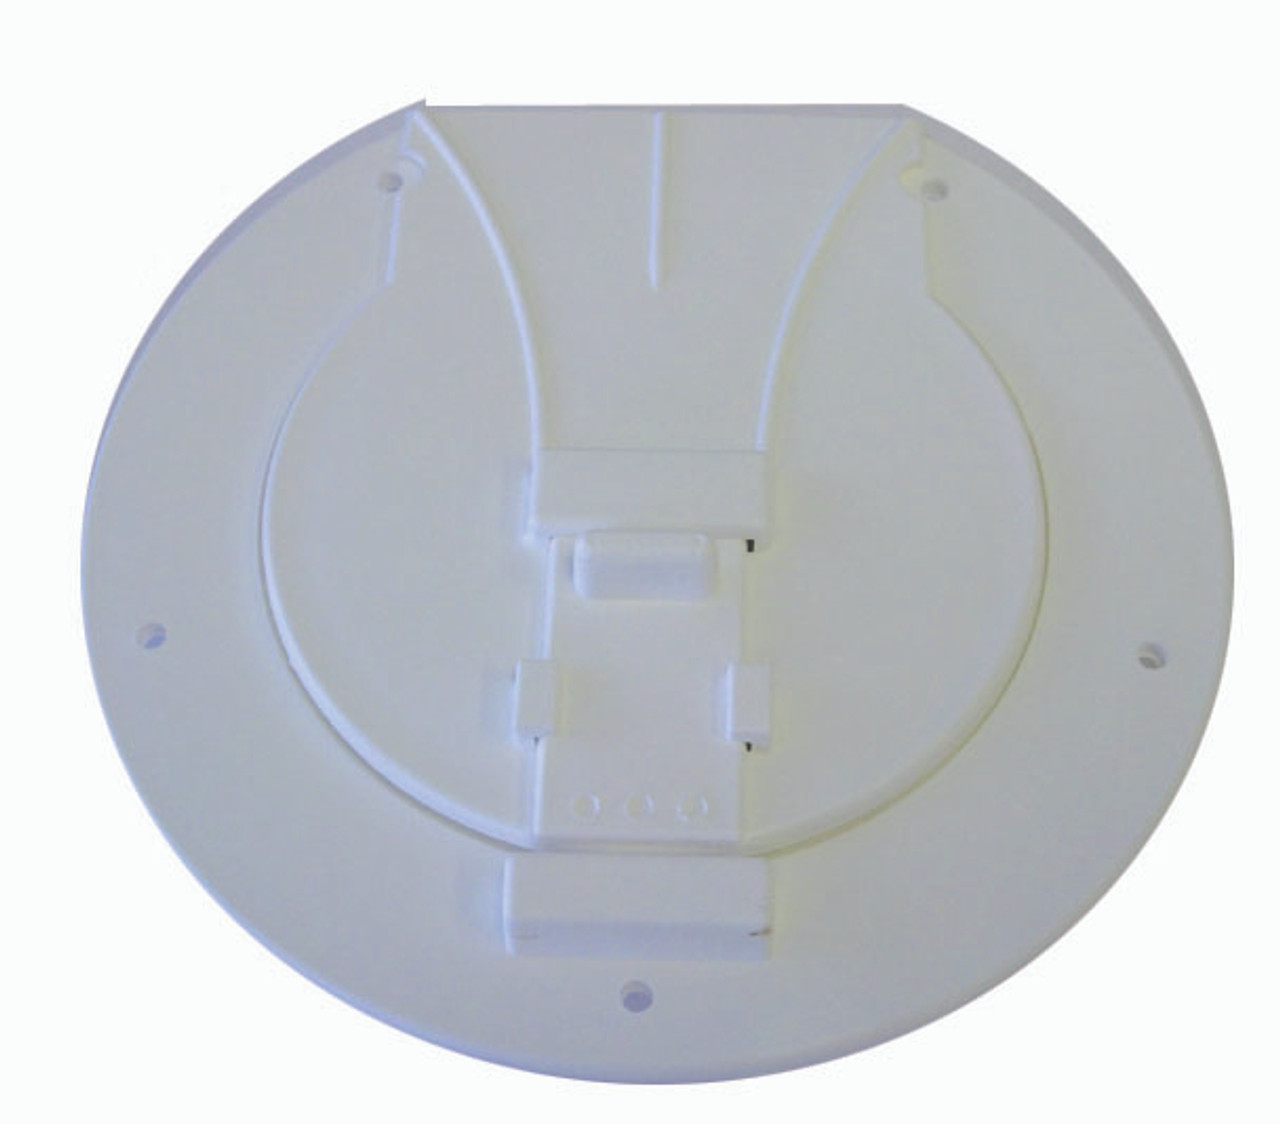 Plstc Pole Container Lid White Used On Jayco Campers | 8264